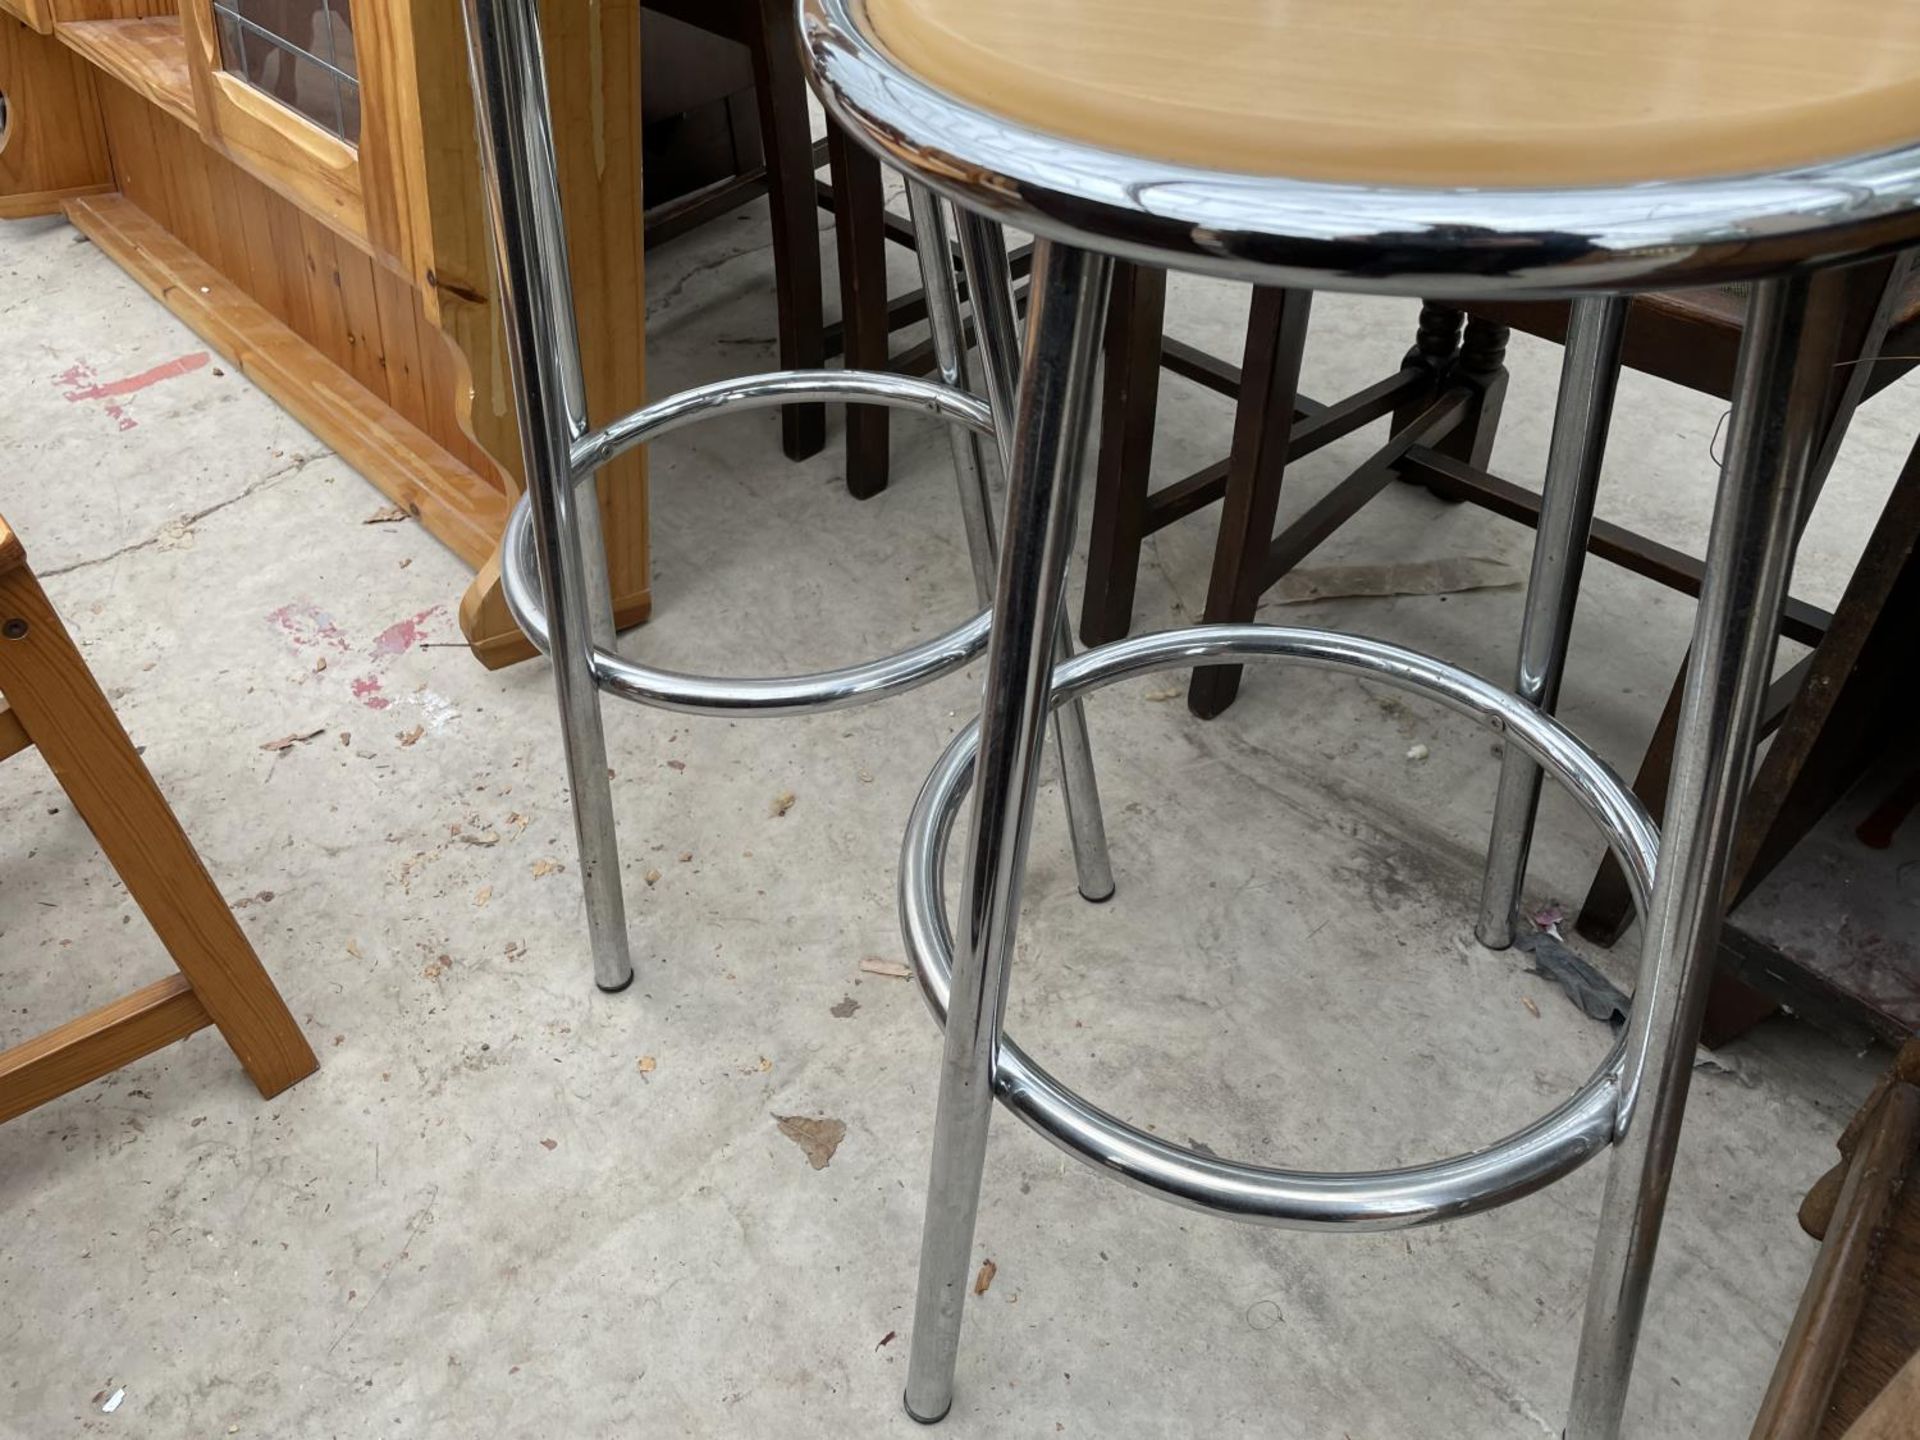 A PAIR OF MODERN CHROMIUM PLATED KITCHEN BAR STOOLS - Image 3 of 3